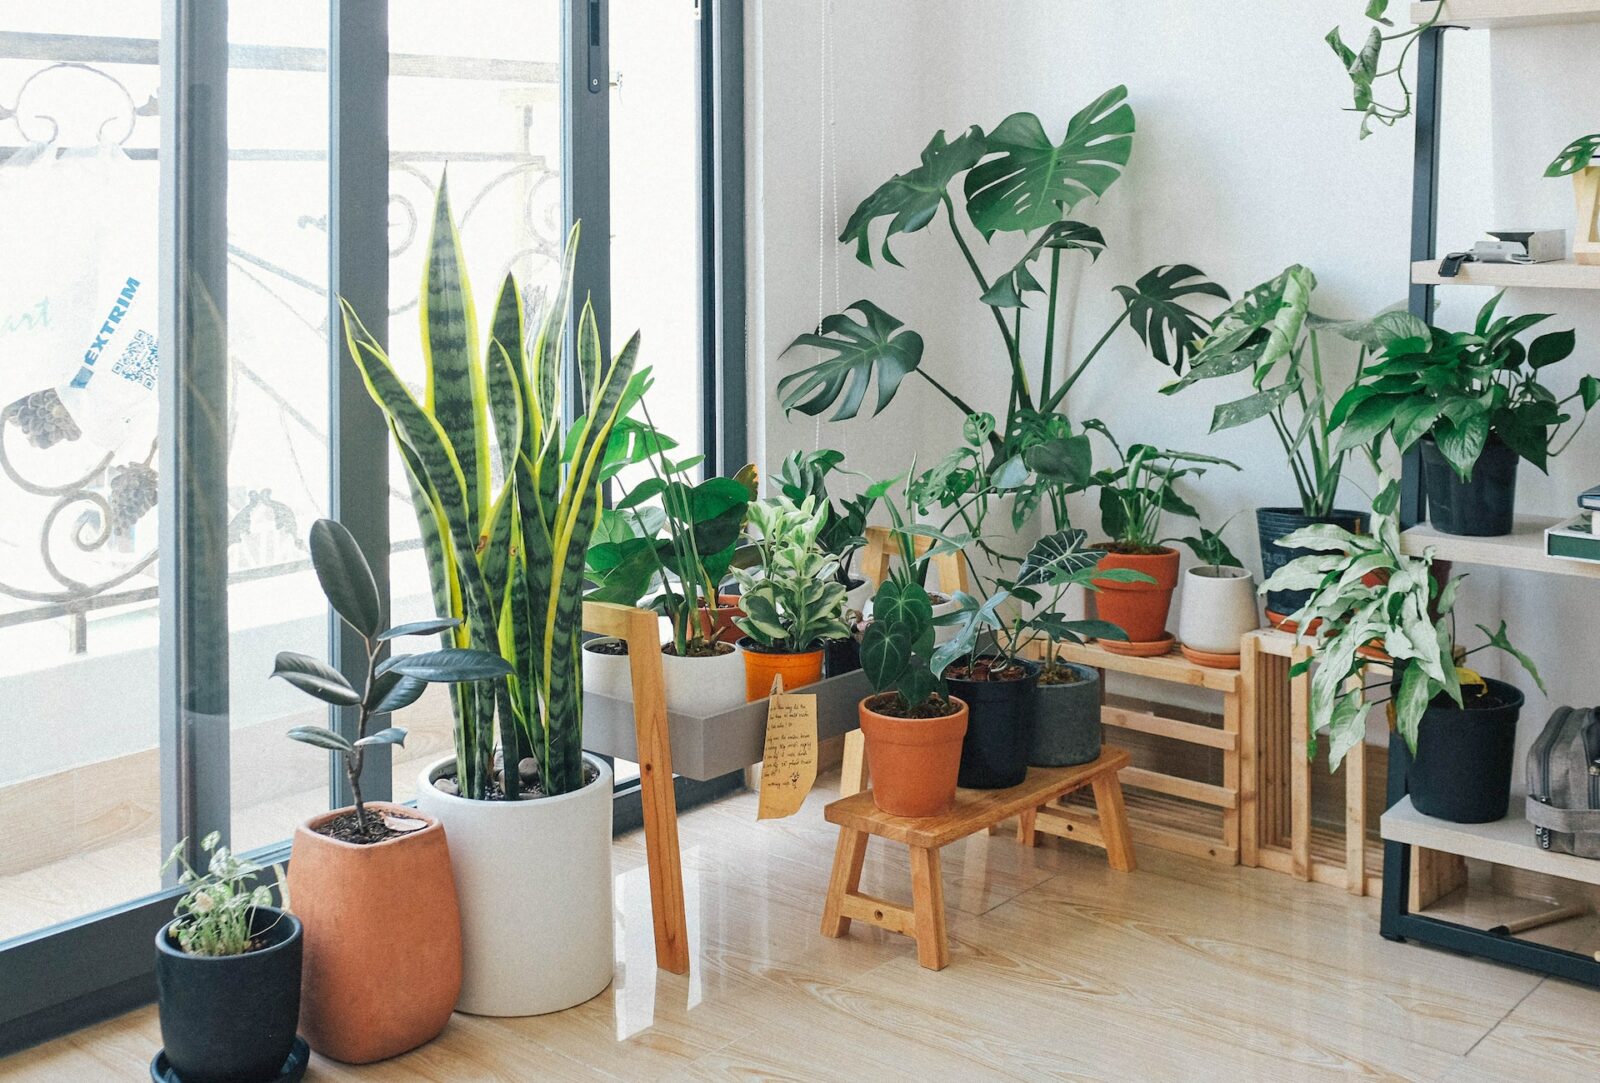 how to clean indoor plant leaves